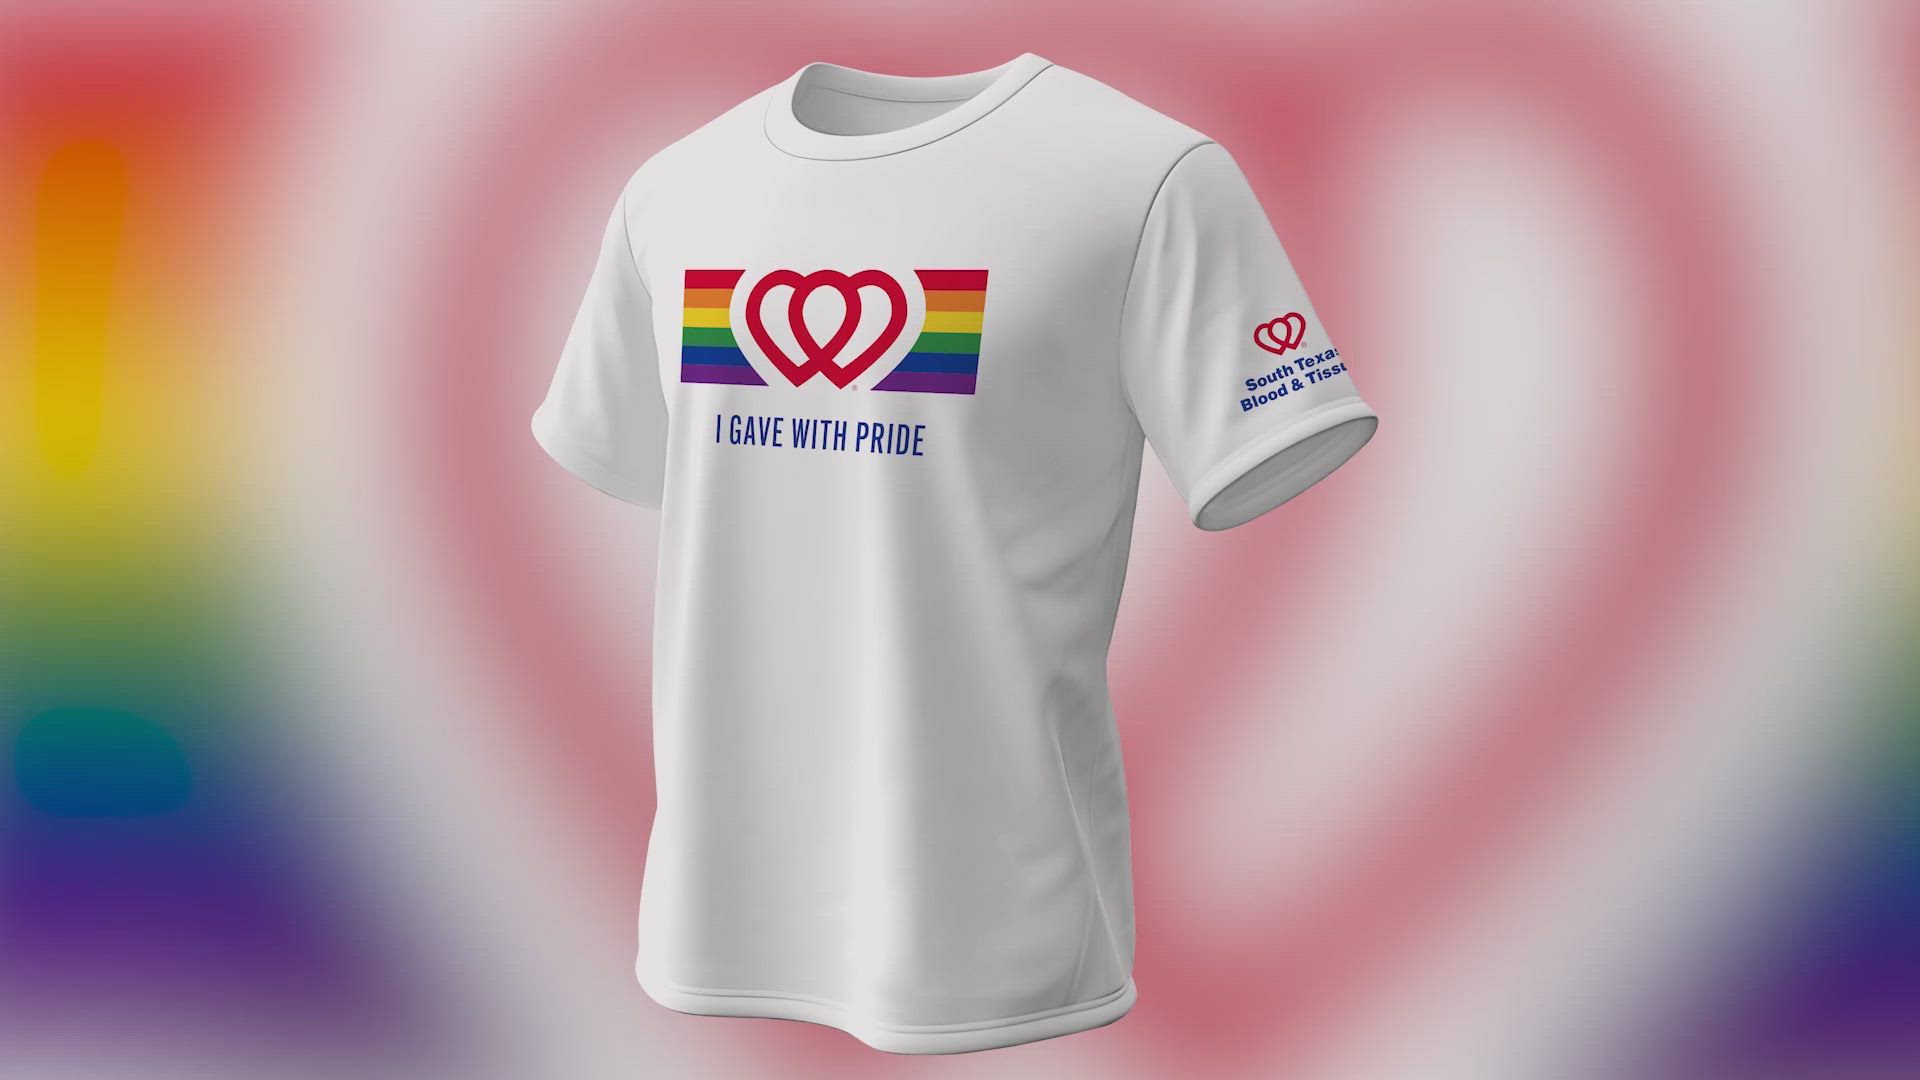 All donors will receive a special edition PRIDE t-shirt.